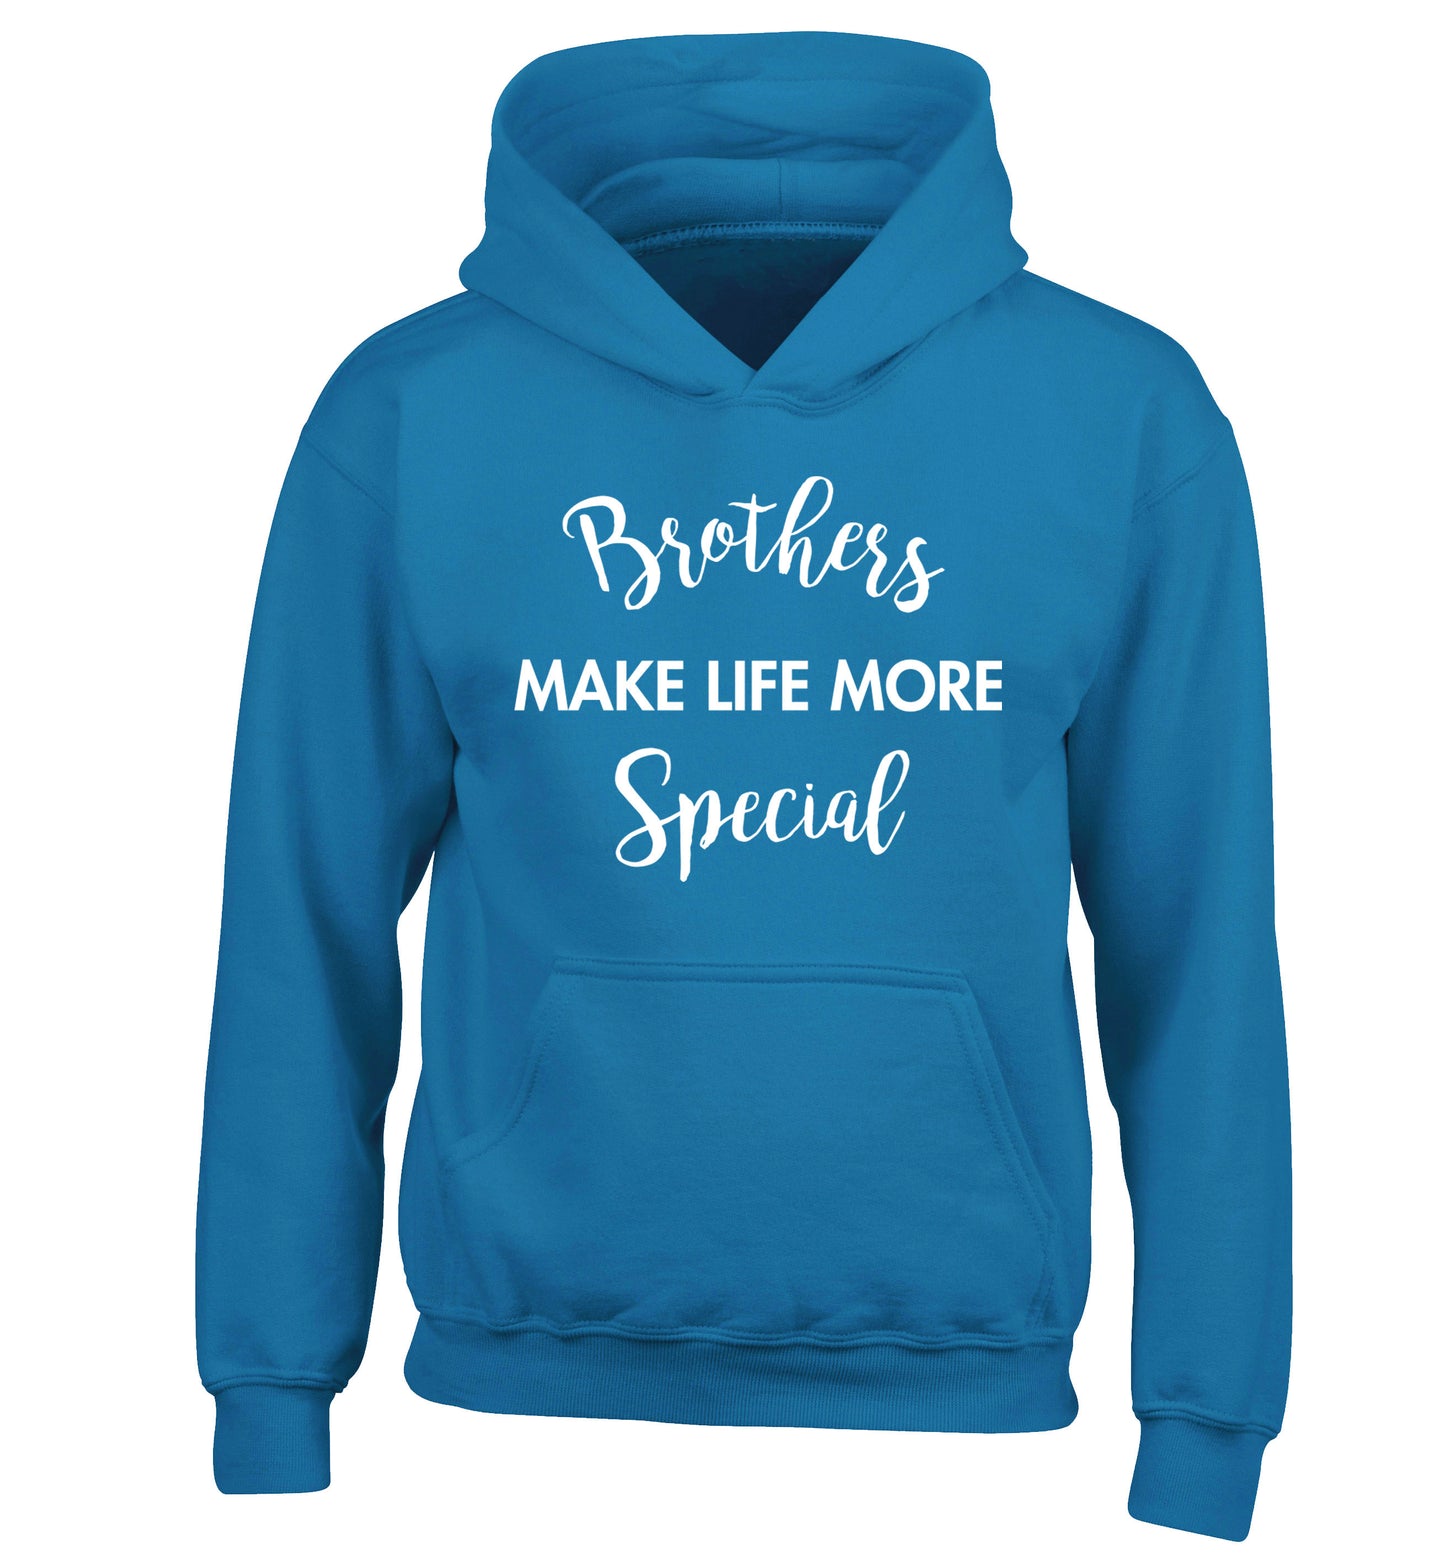 Brothers make life more special children's blue hoodie 12-14 Years